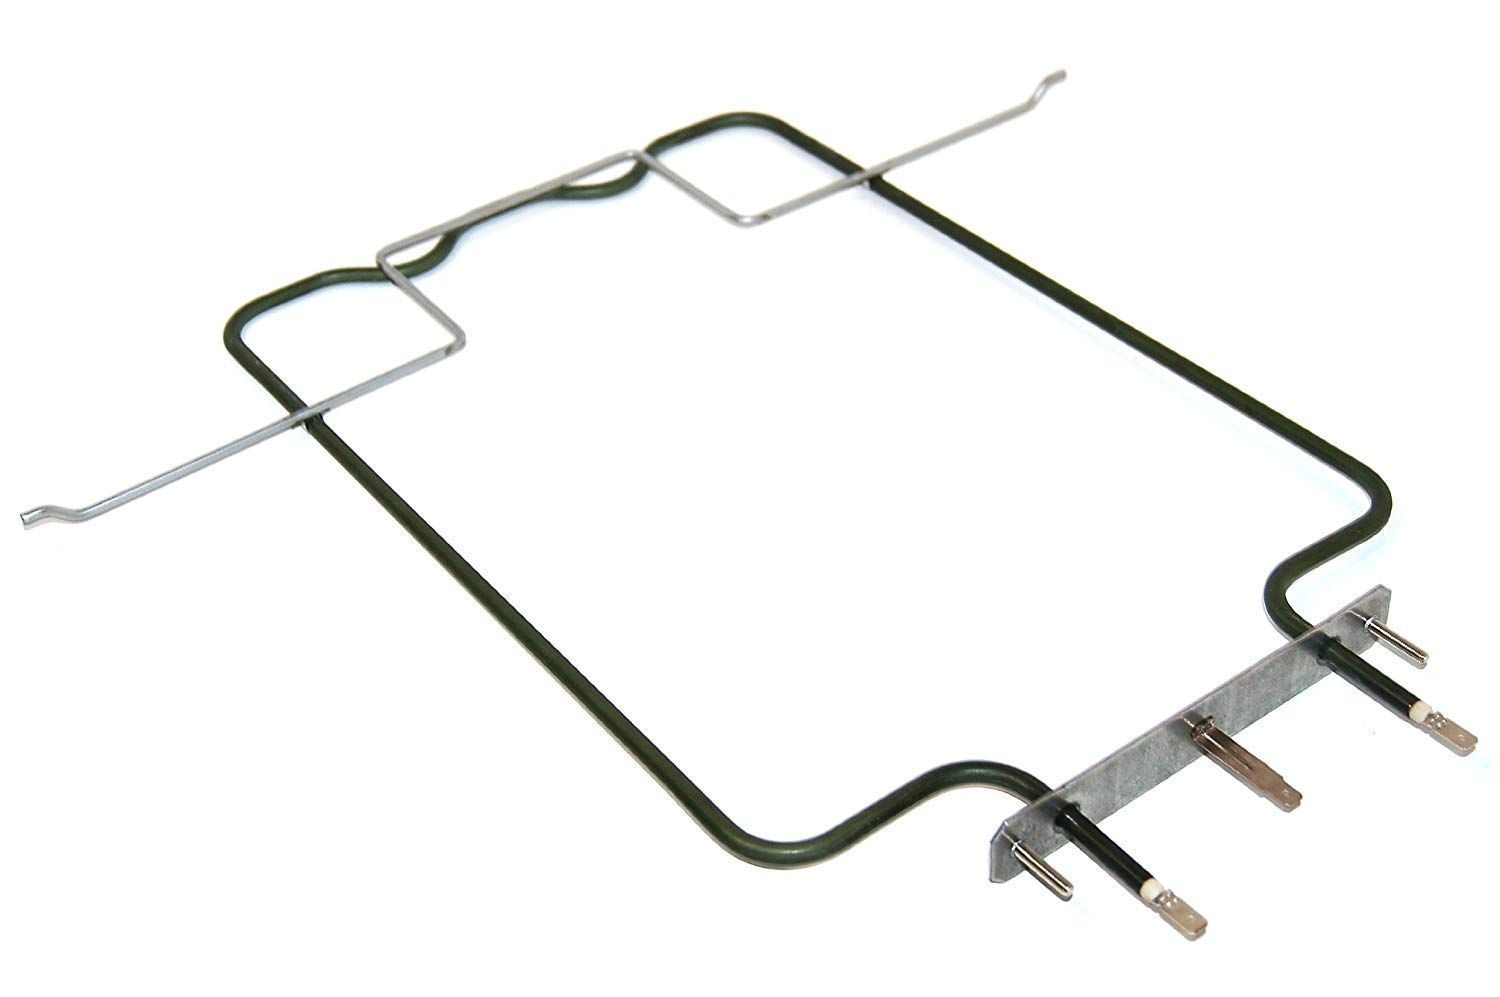 Upper Heating Element for Whirlpool Indesit Ovens - 481925928792 Whirlpool / Indesit